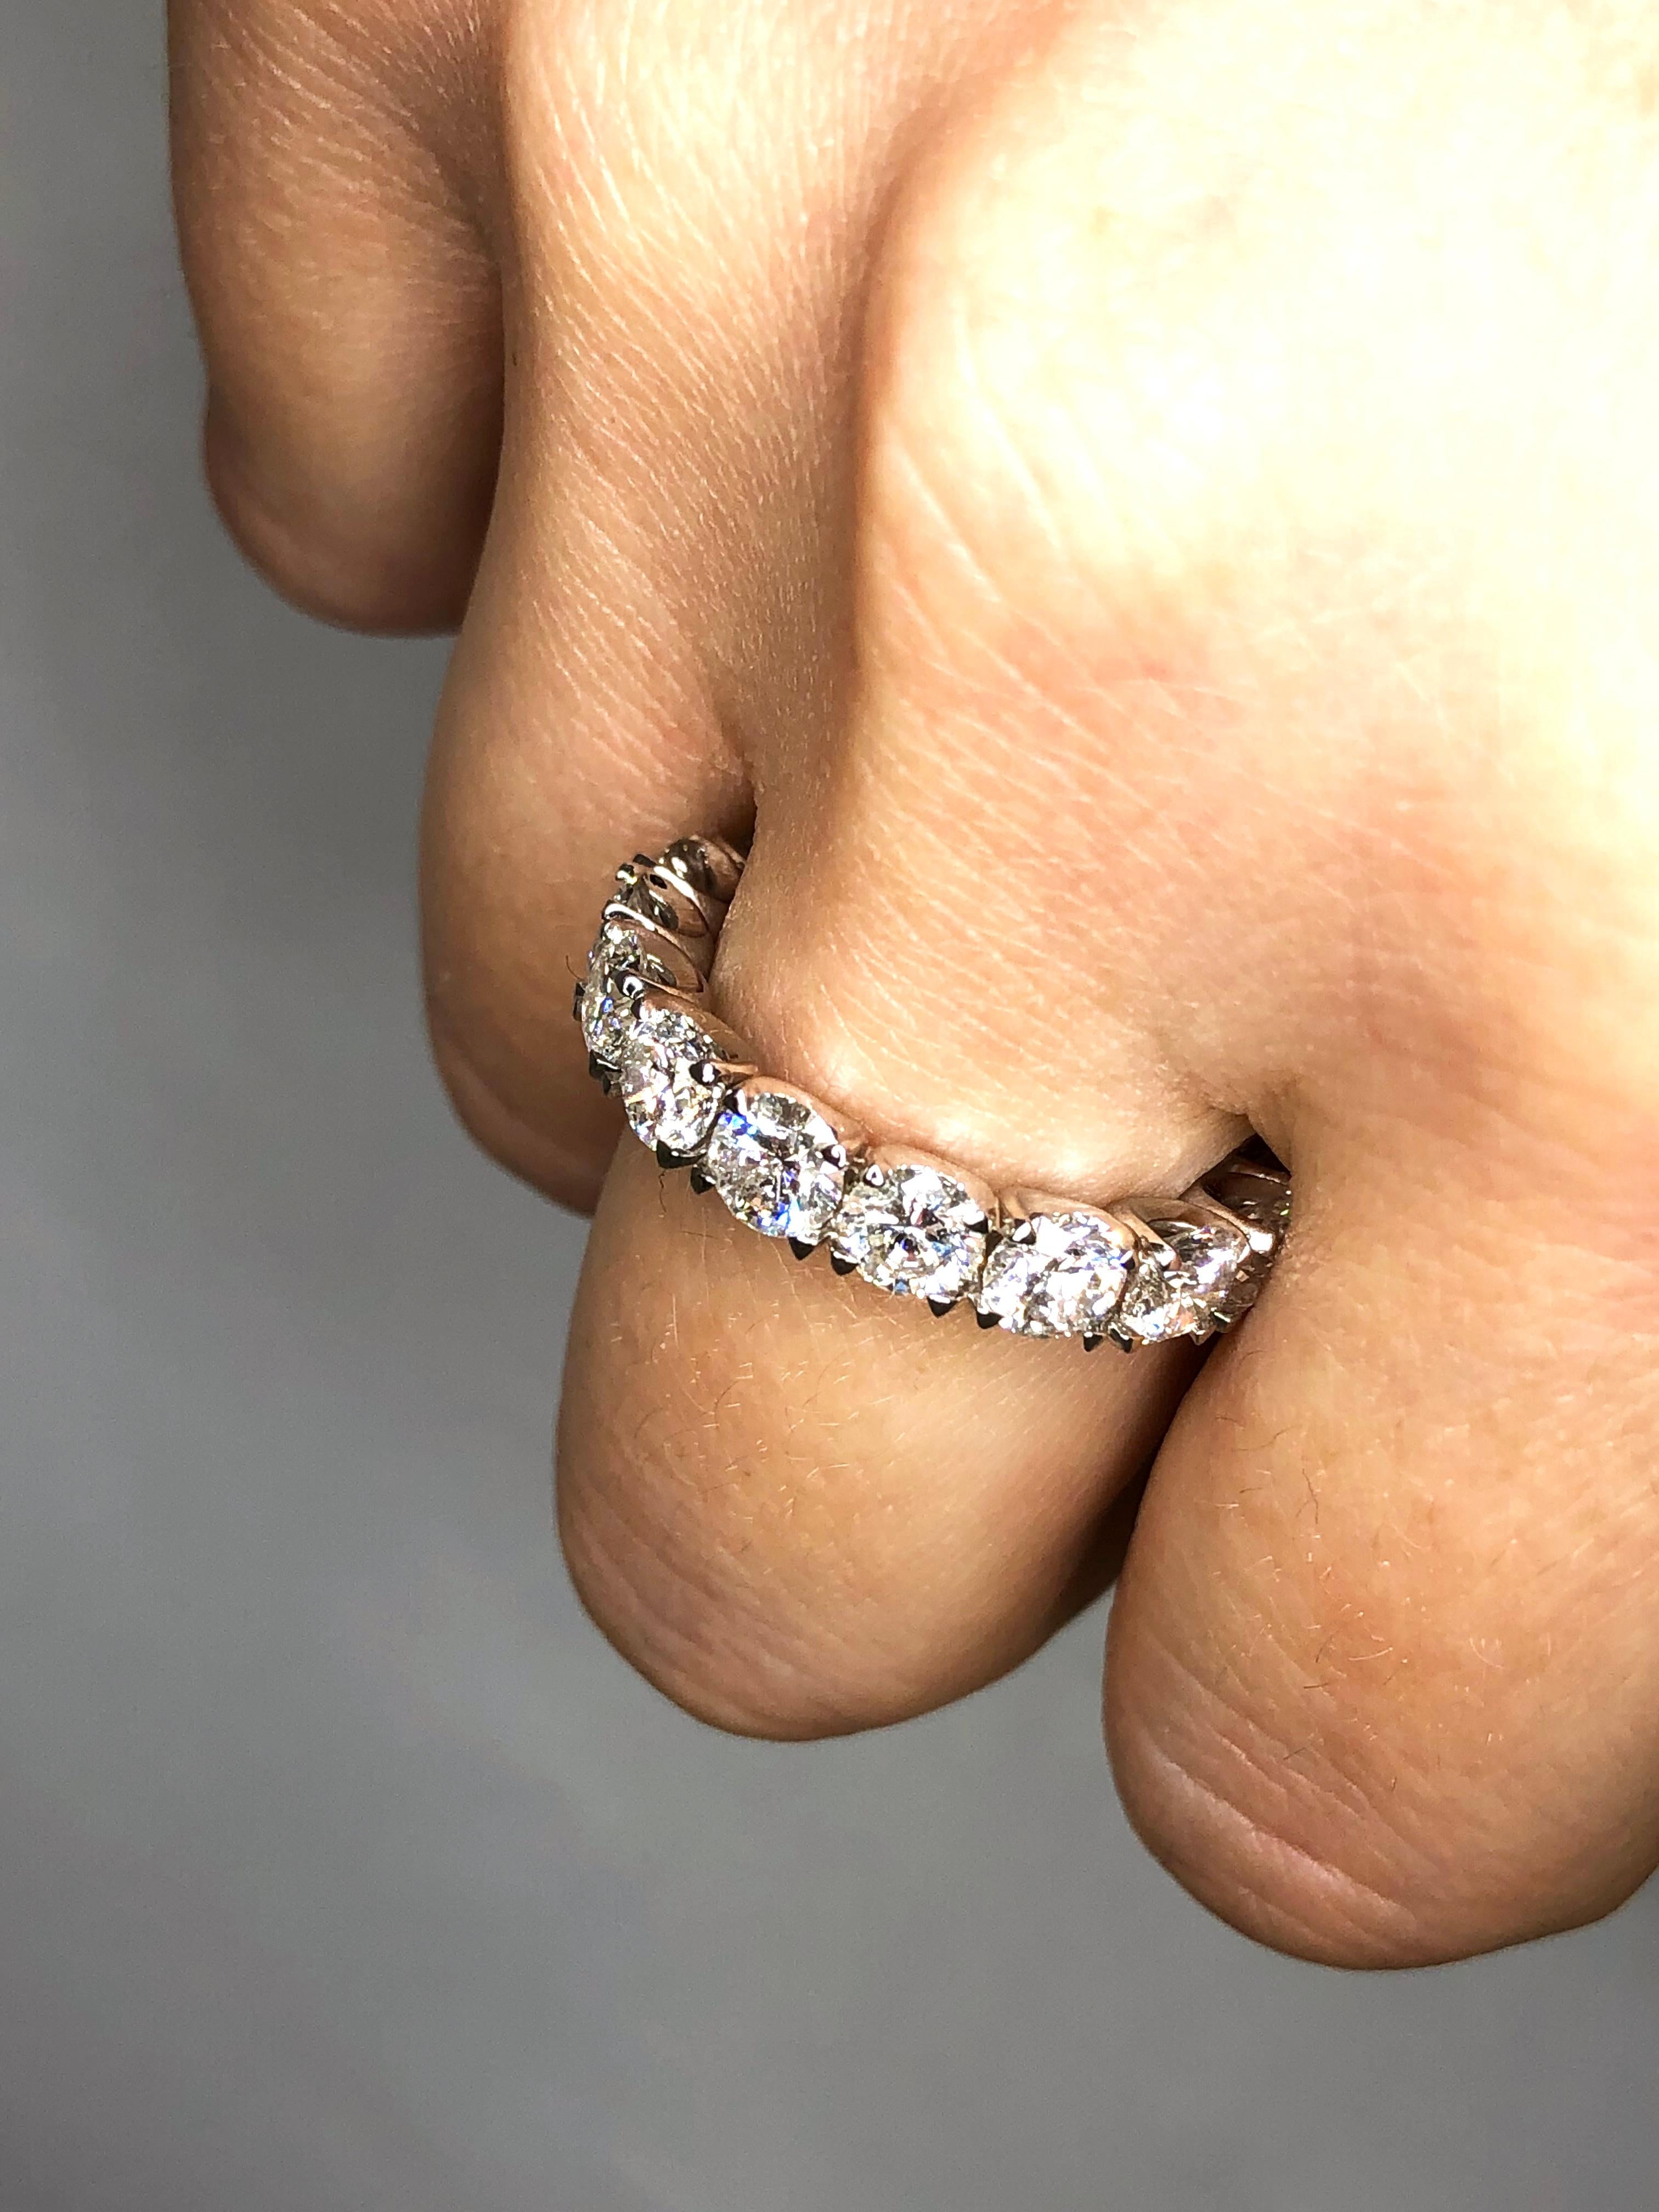 Diamond Eternity Band set in Platinum. All natural Round Brilliant diamonds: F-G VS2-SI1 . Carat weight: 4.45ct. Total ring weight: 7.1 grams. Ring size: 5.5. Can be sized upon request. This ring is customizable, price may vary depending on